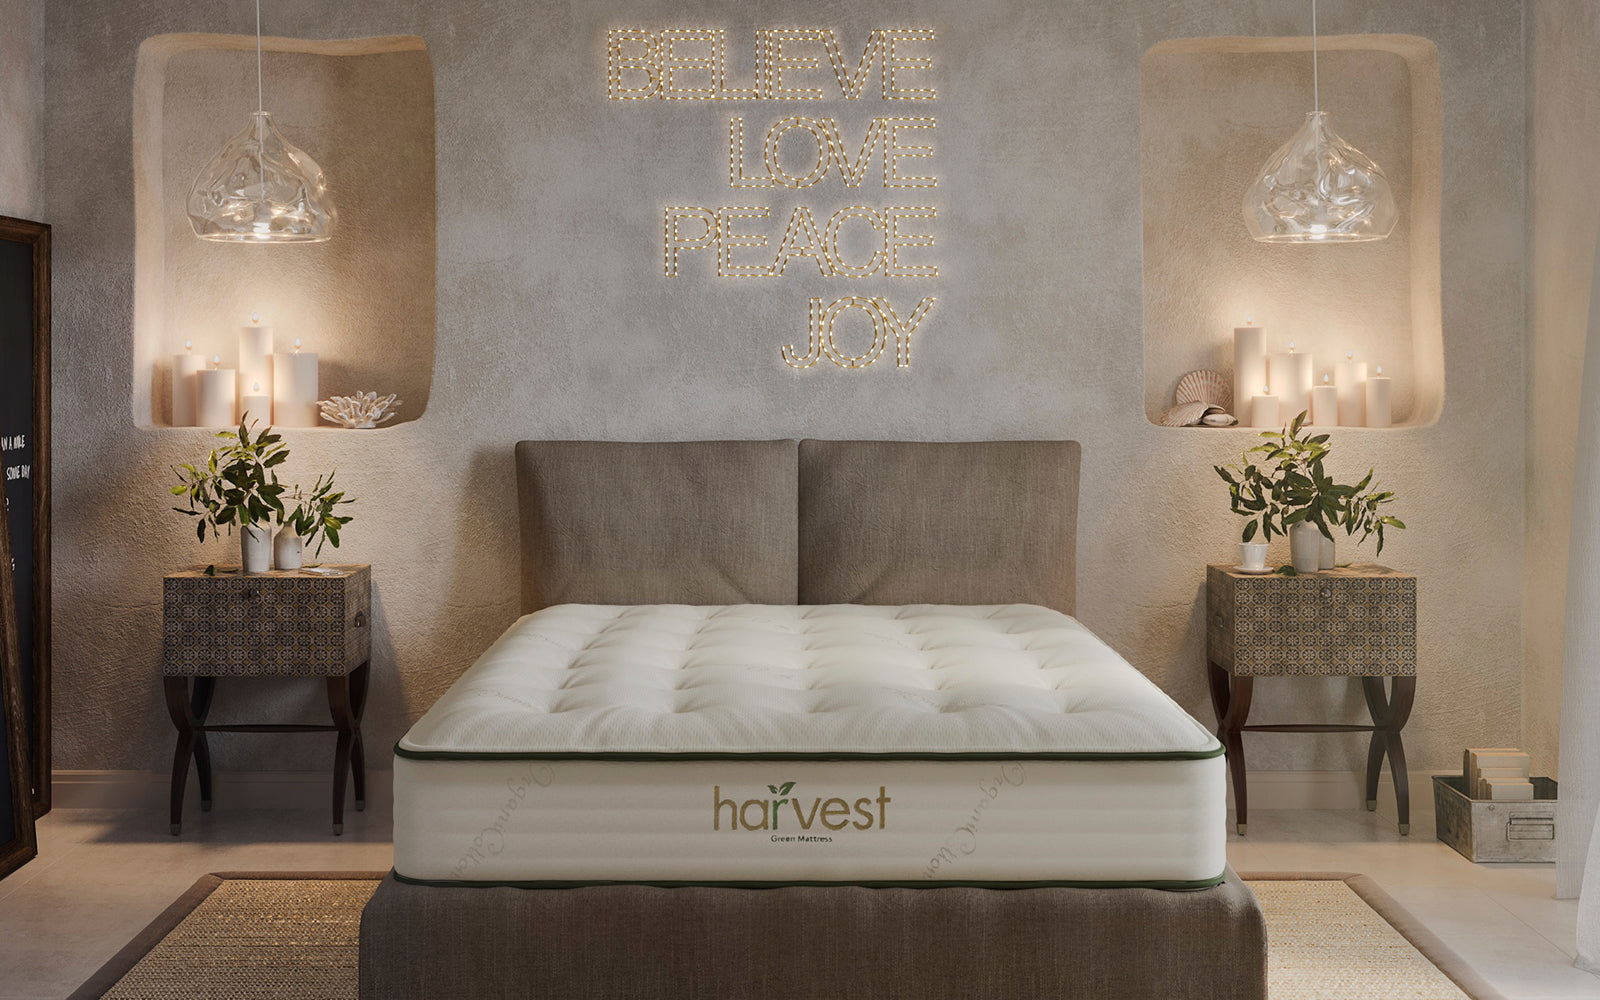 Room image of our Harvest green double-sided original mattress in a sophisticated bedroom scene